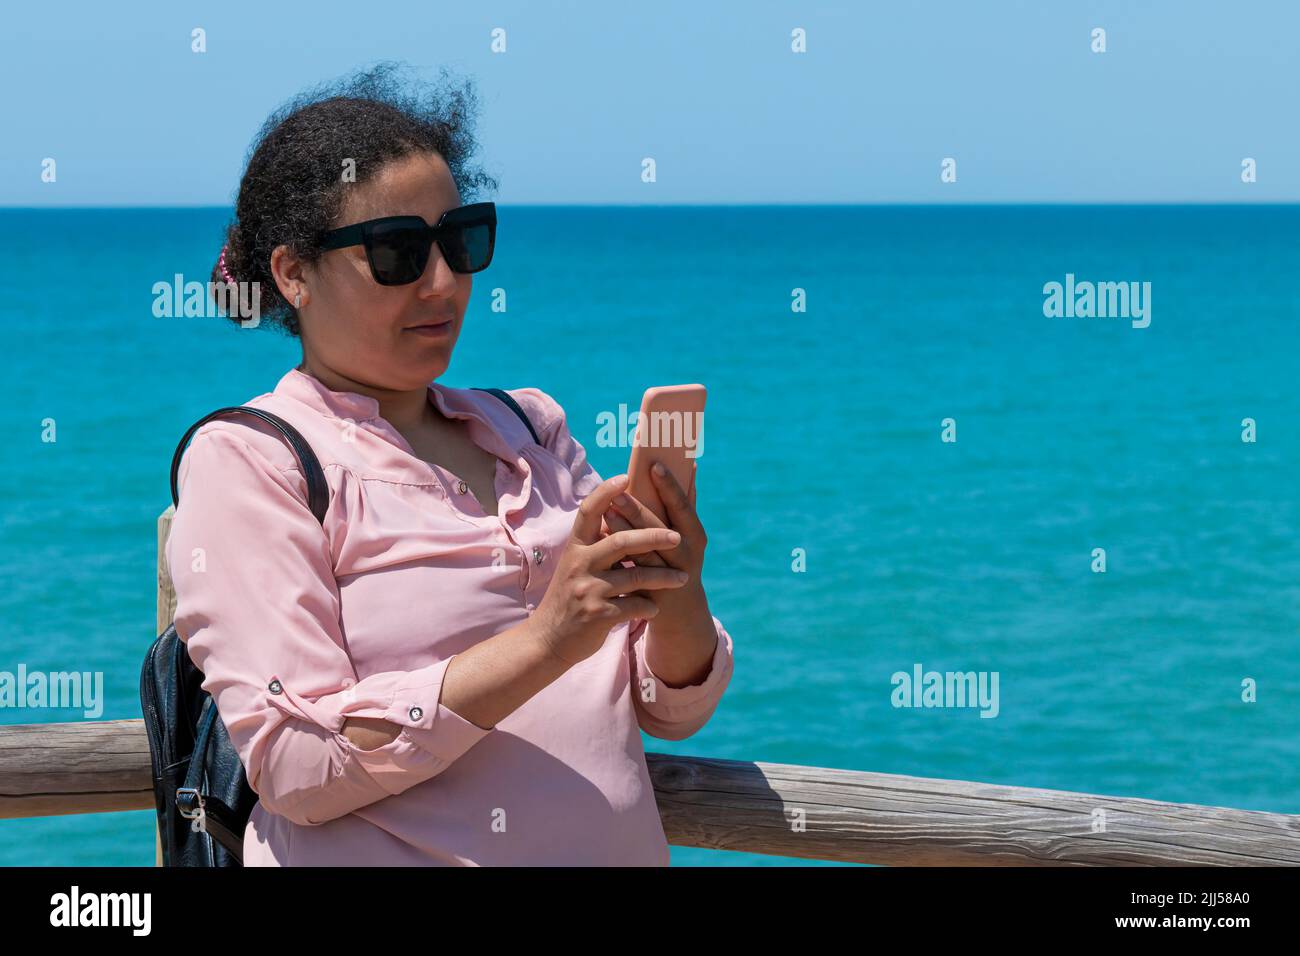 Focused woman with glasses checking her phone near the sea Stock Photo